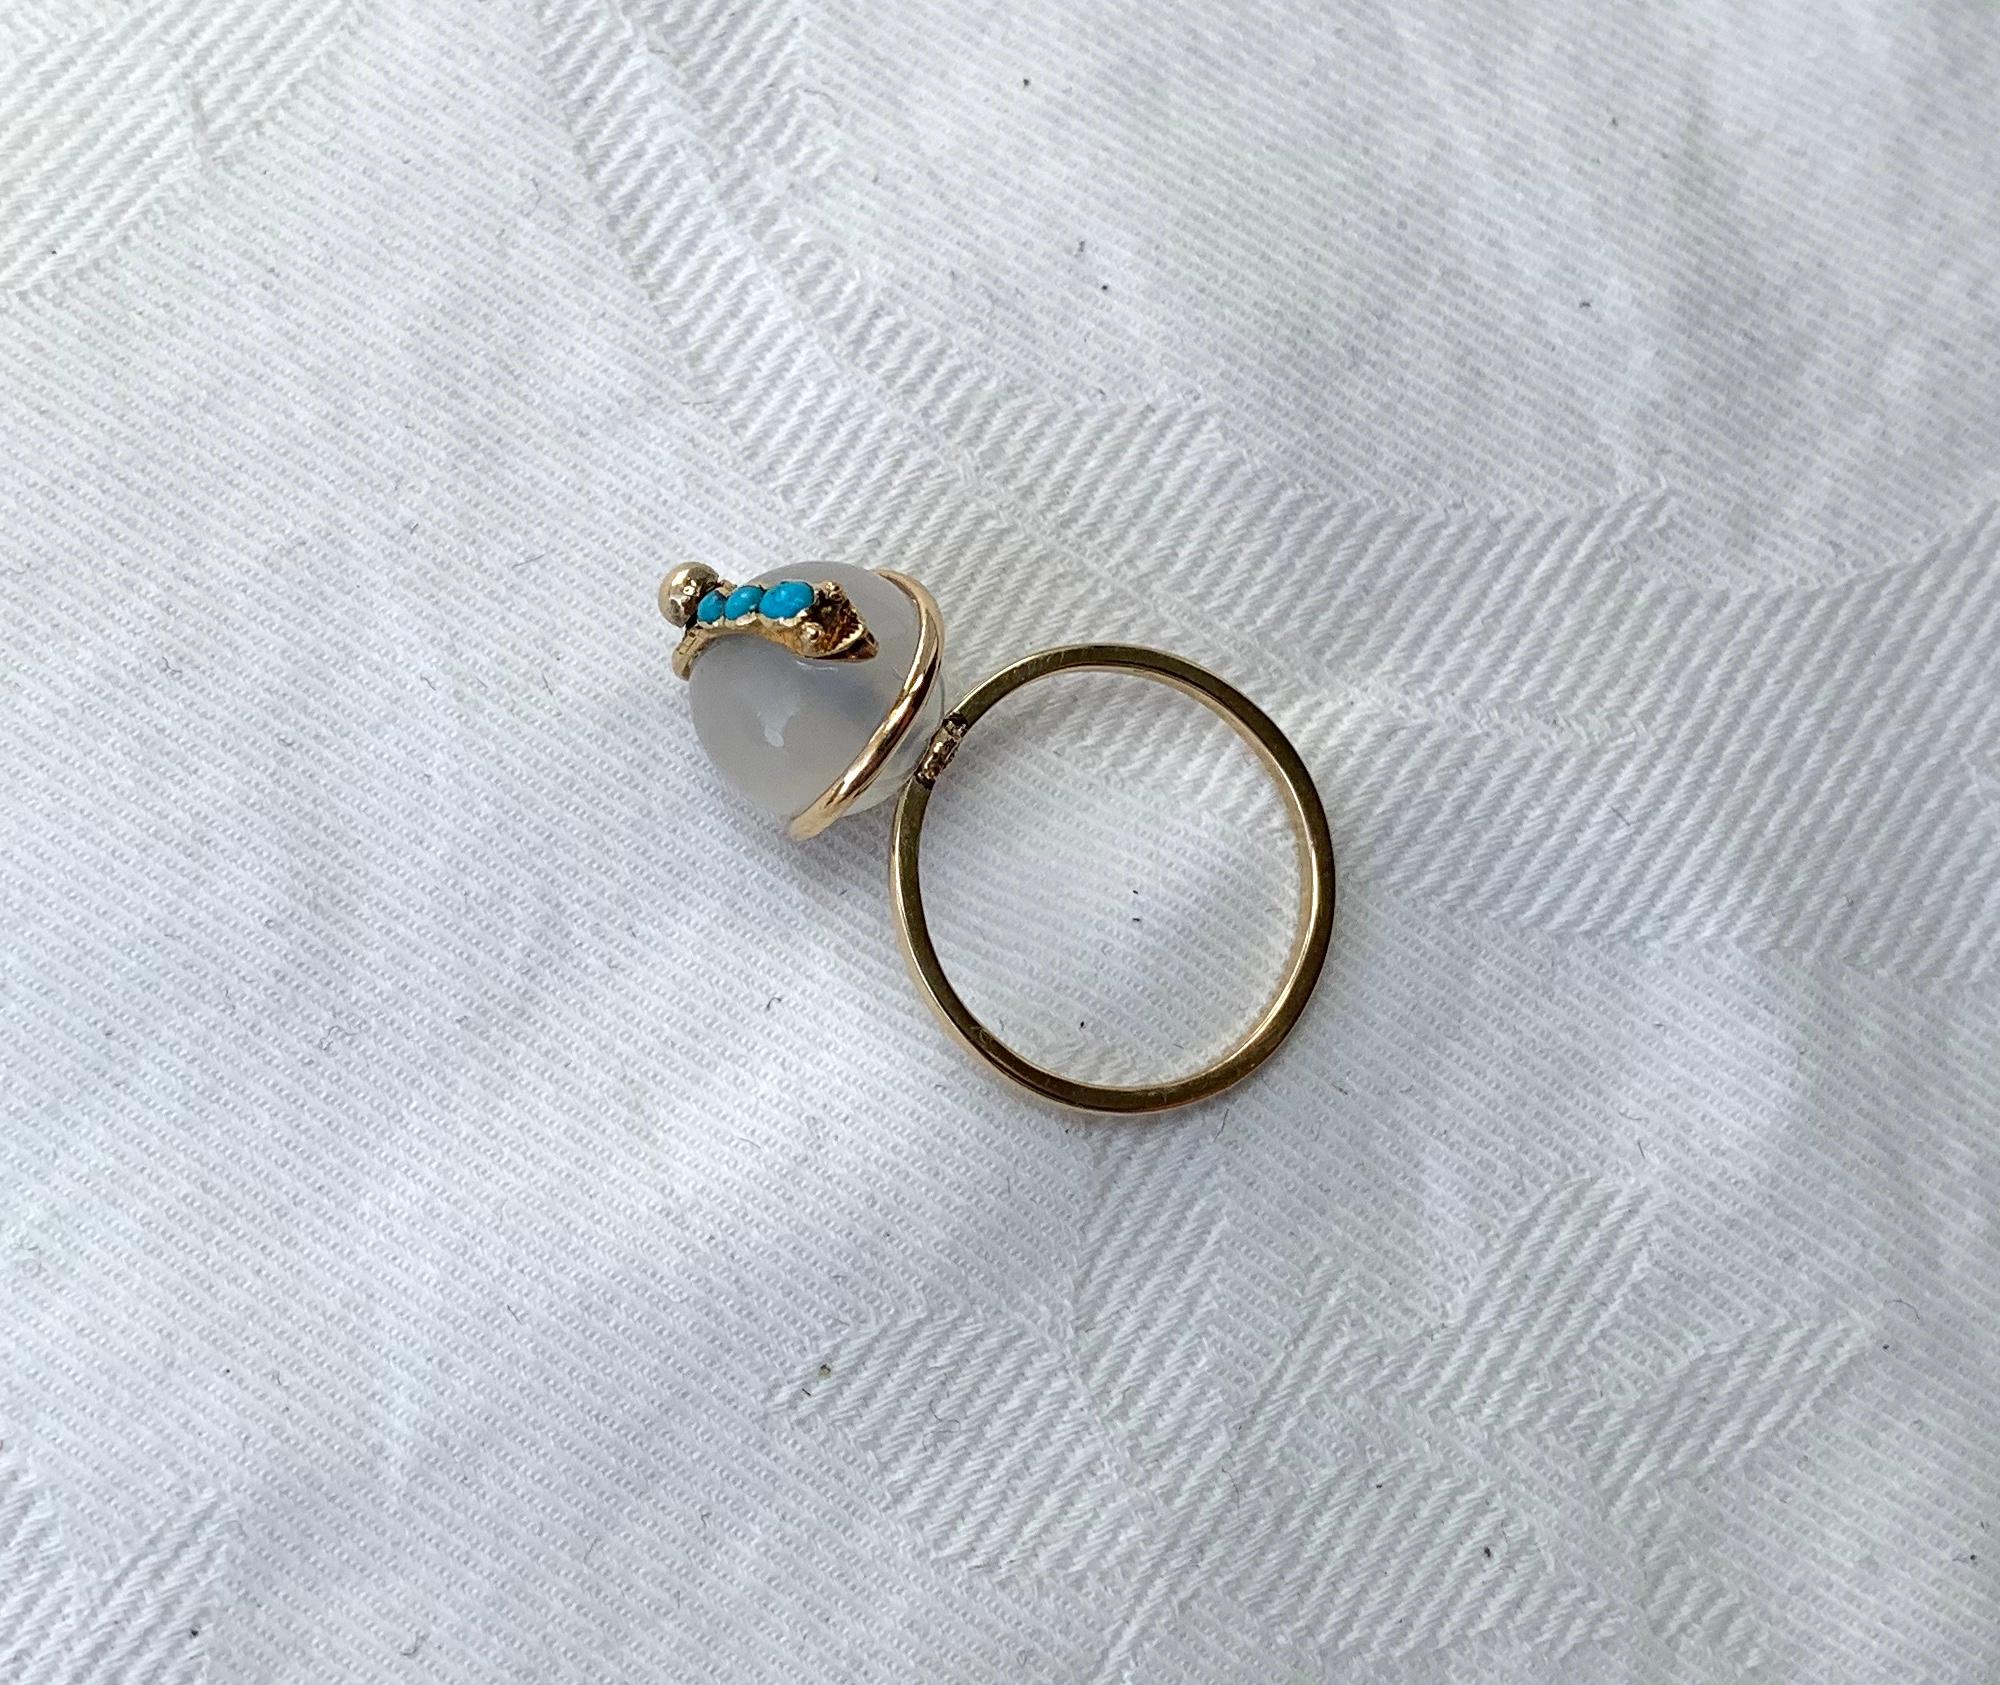 Victorian Snake Globe Ring Turquoise Moonstone Gold Antique For Sale 1